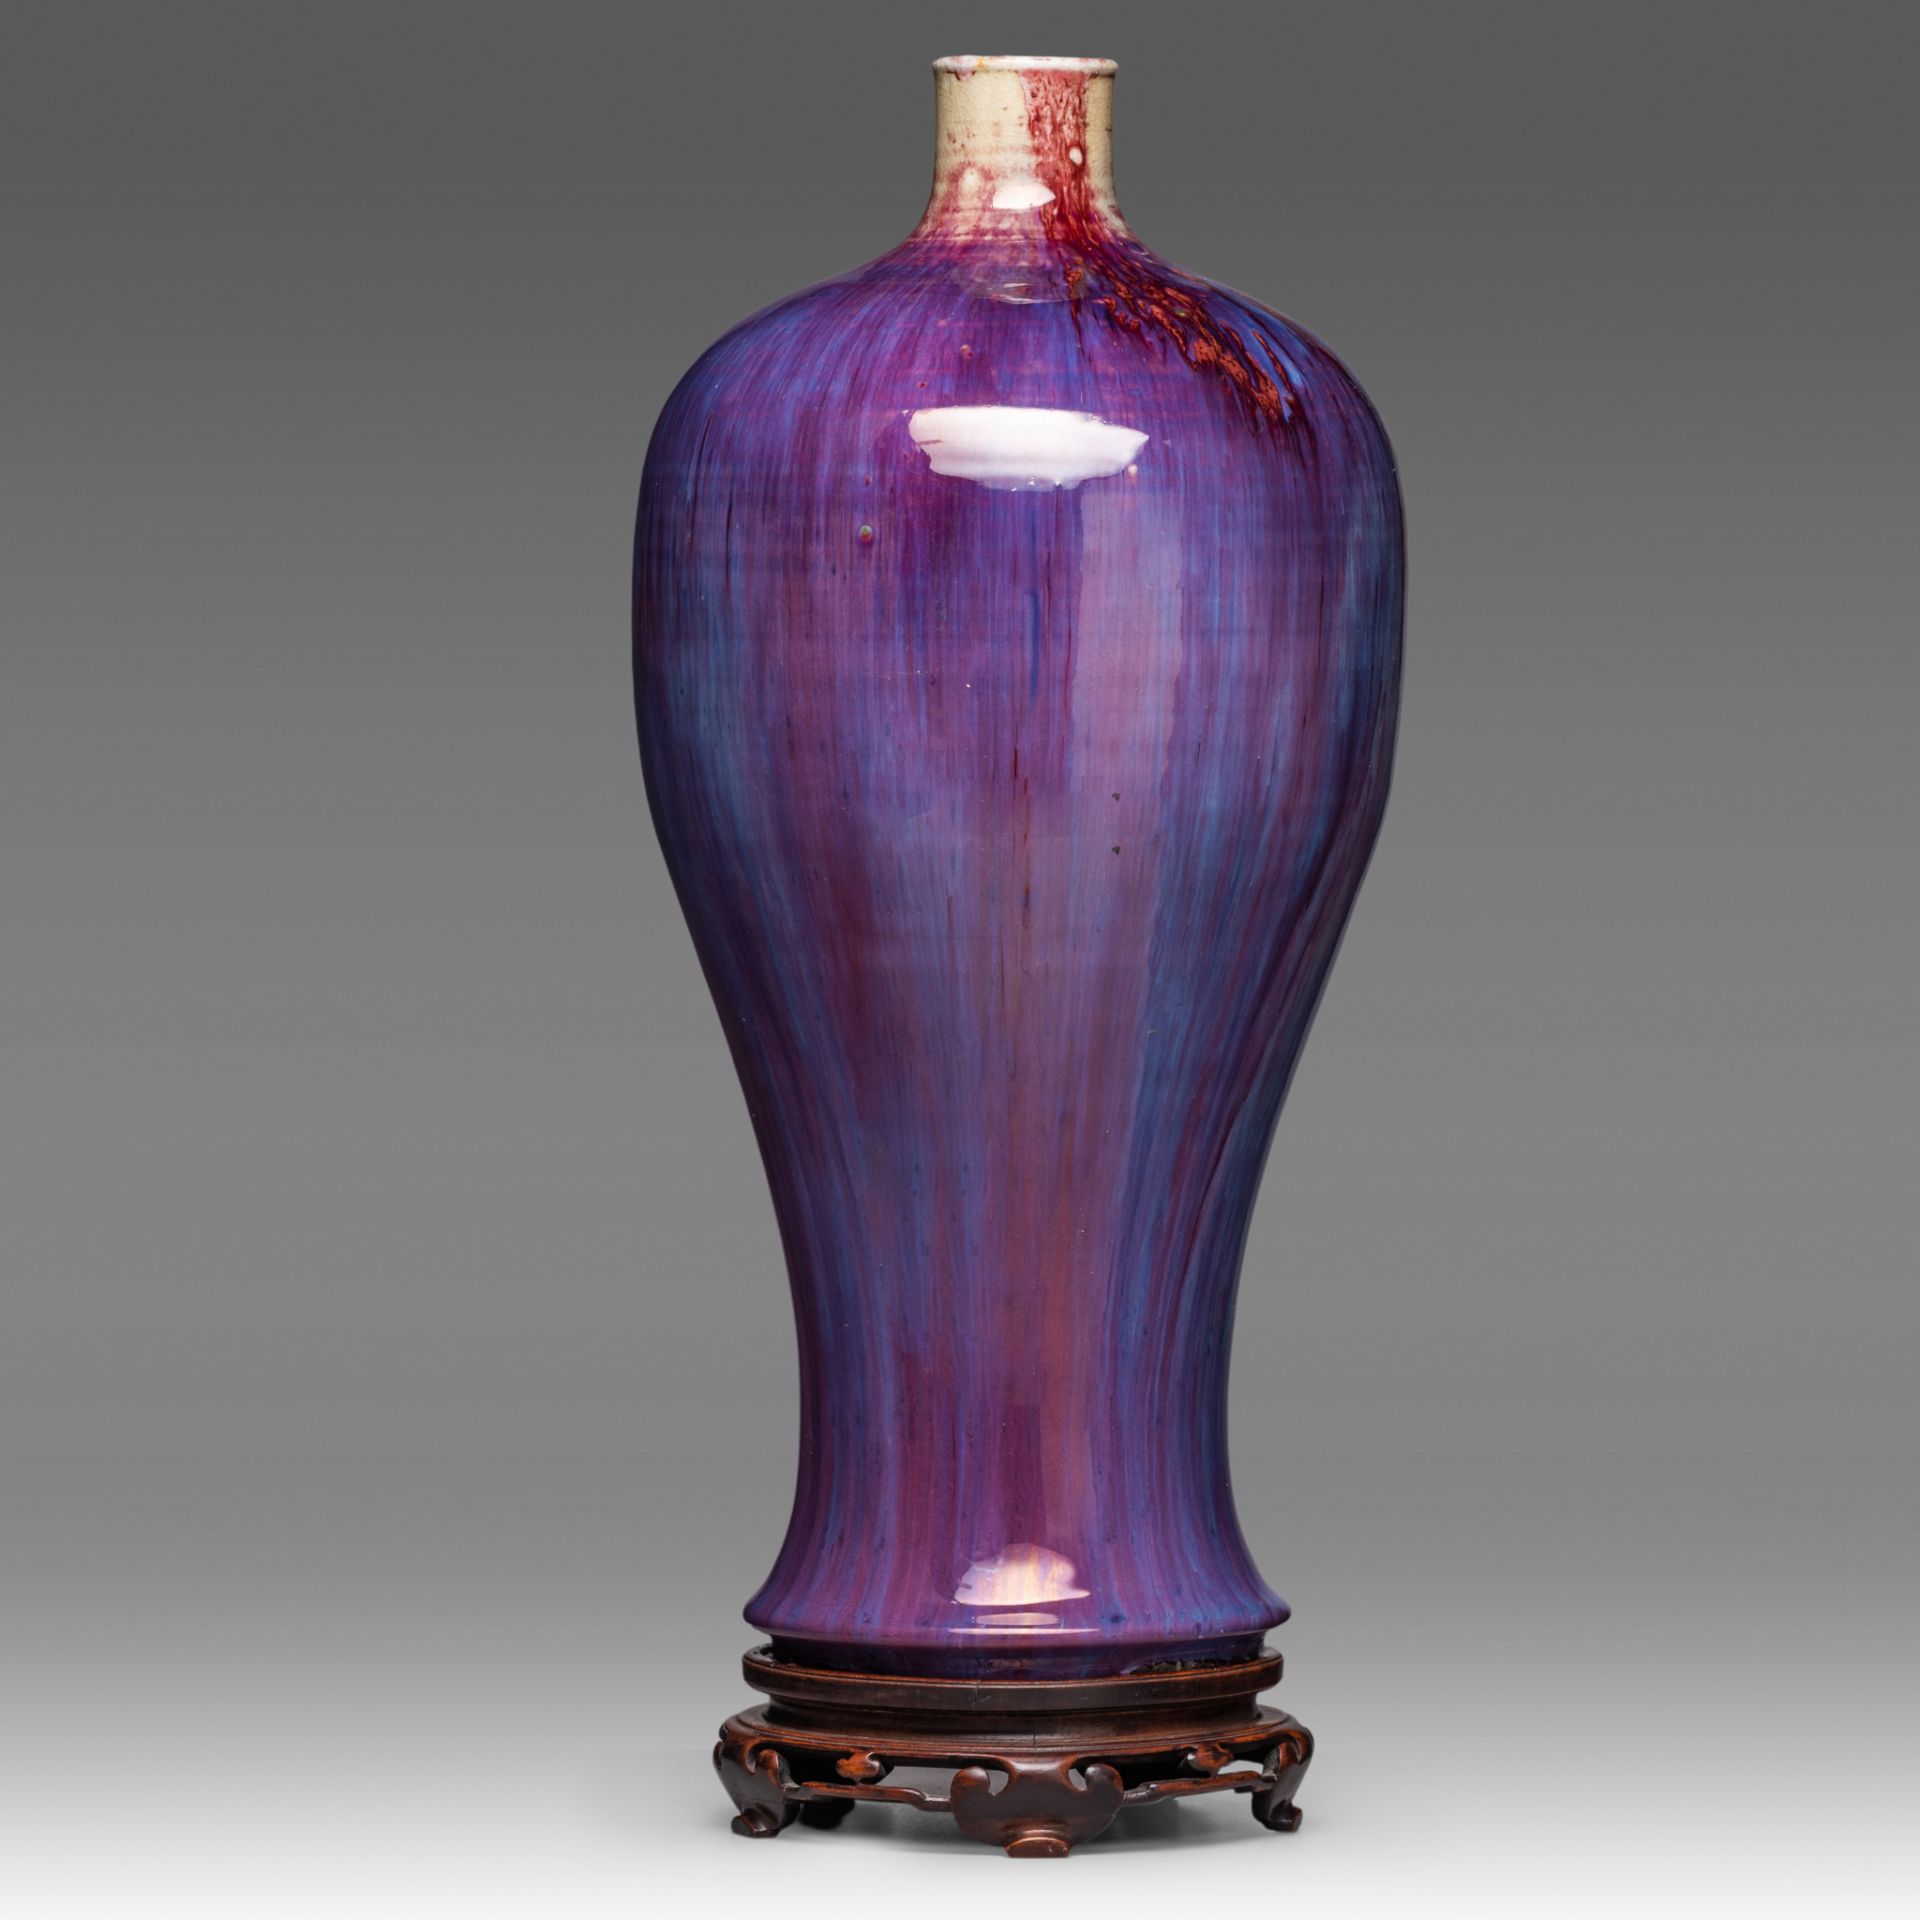 A tall Chinese flambe-glazed meiping vase, fixed on a wooden base, H 49,5 cm